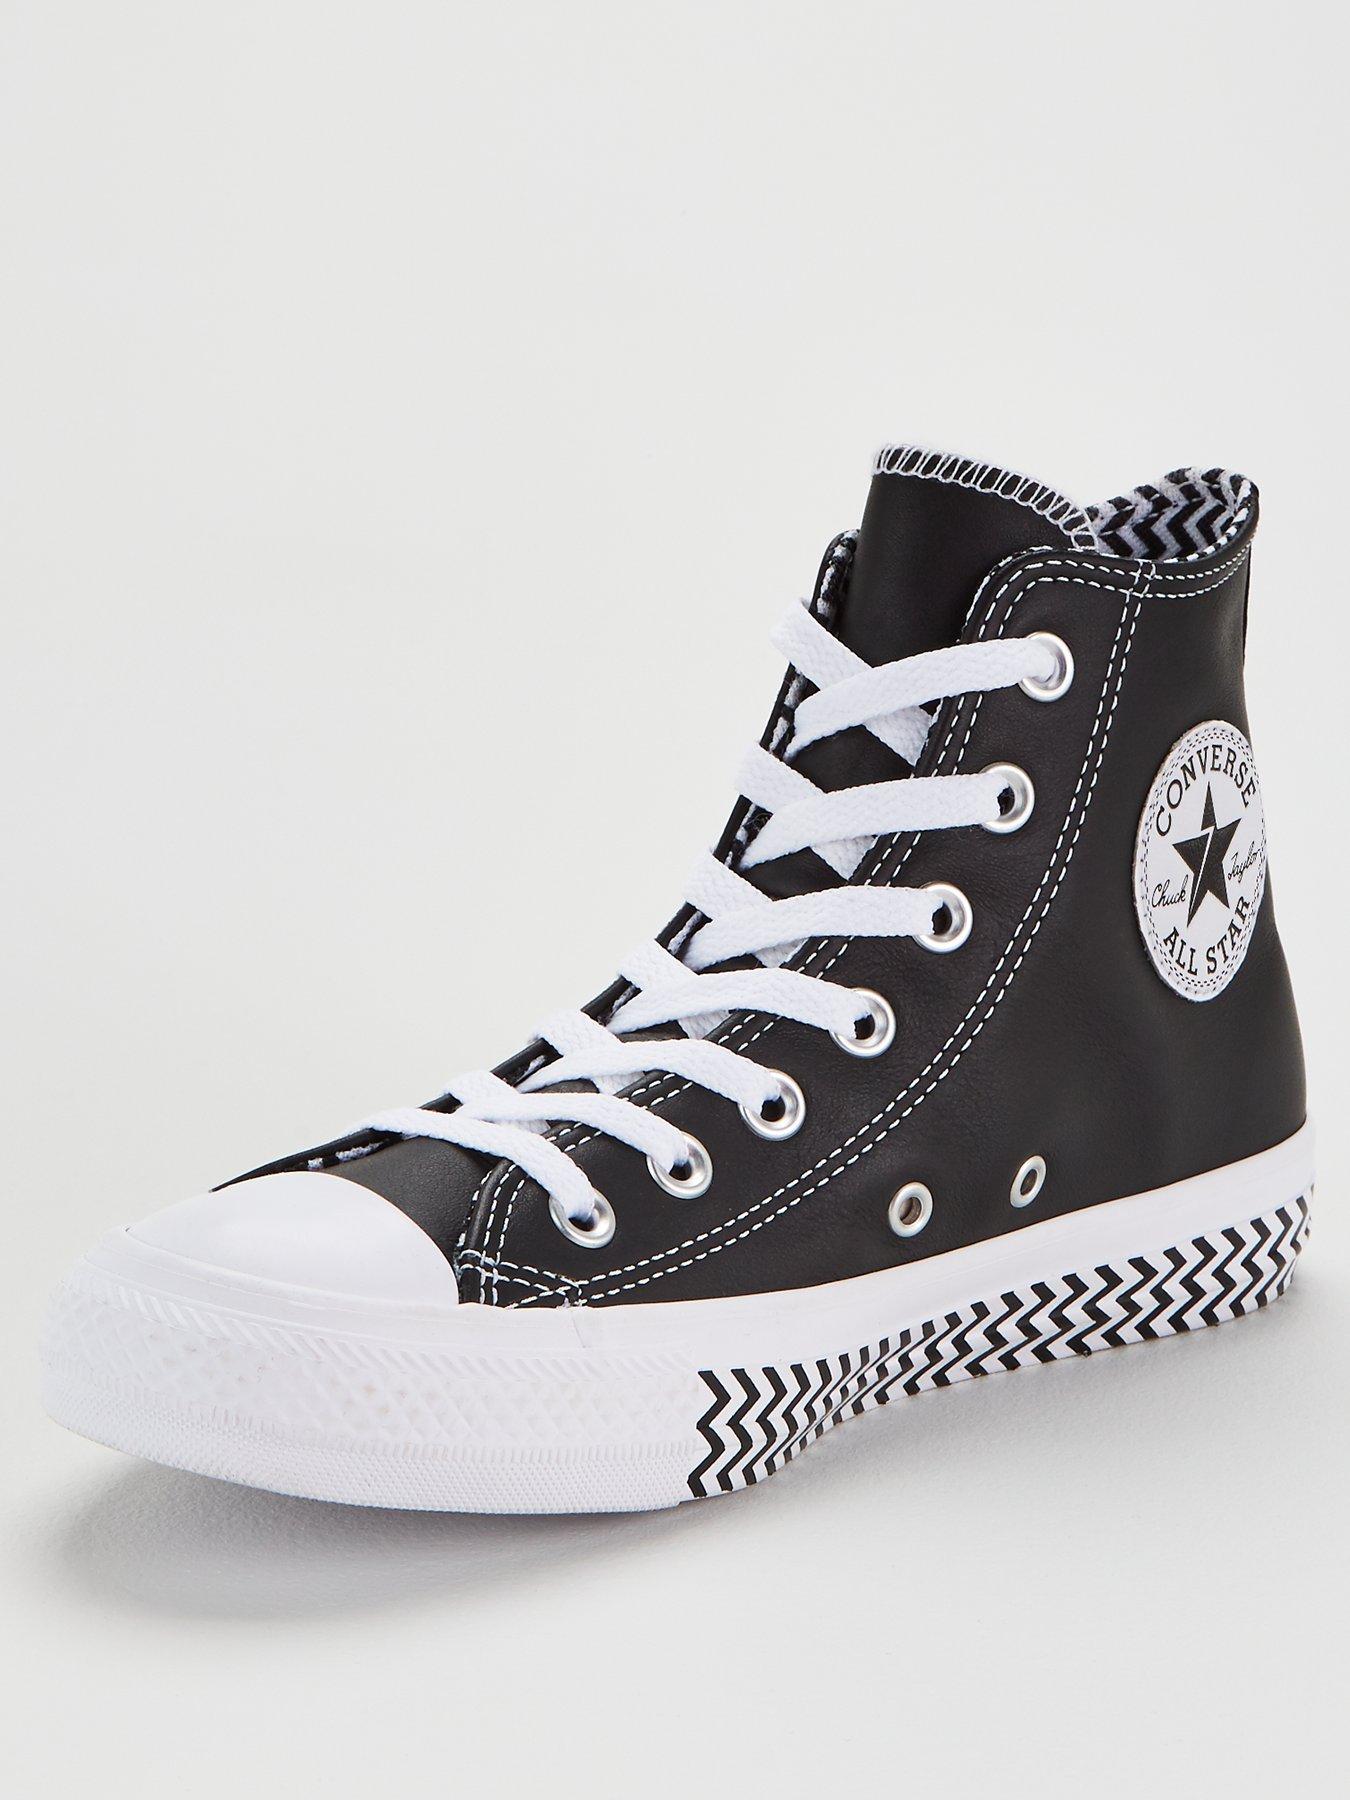 black and white leather high top converse